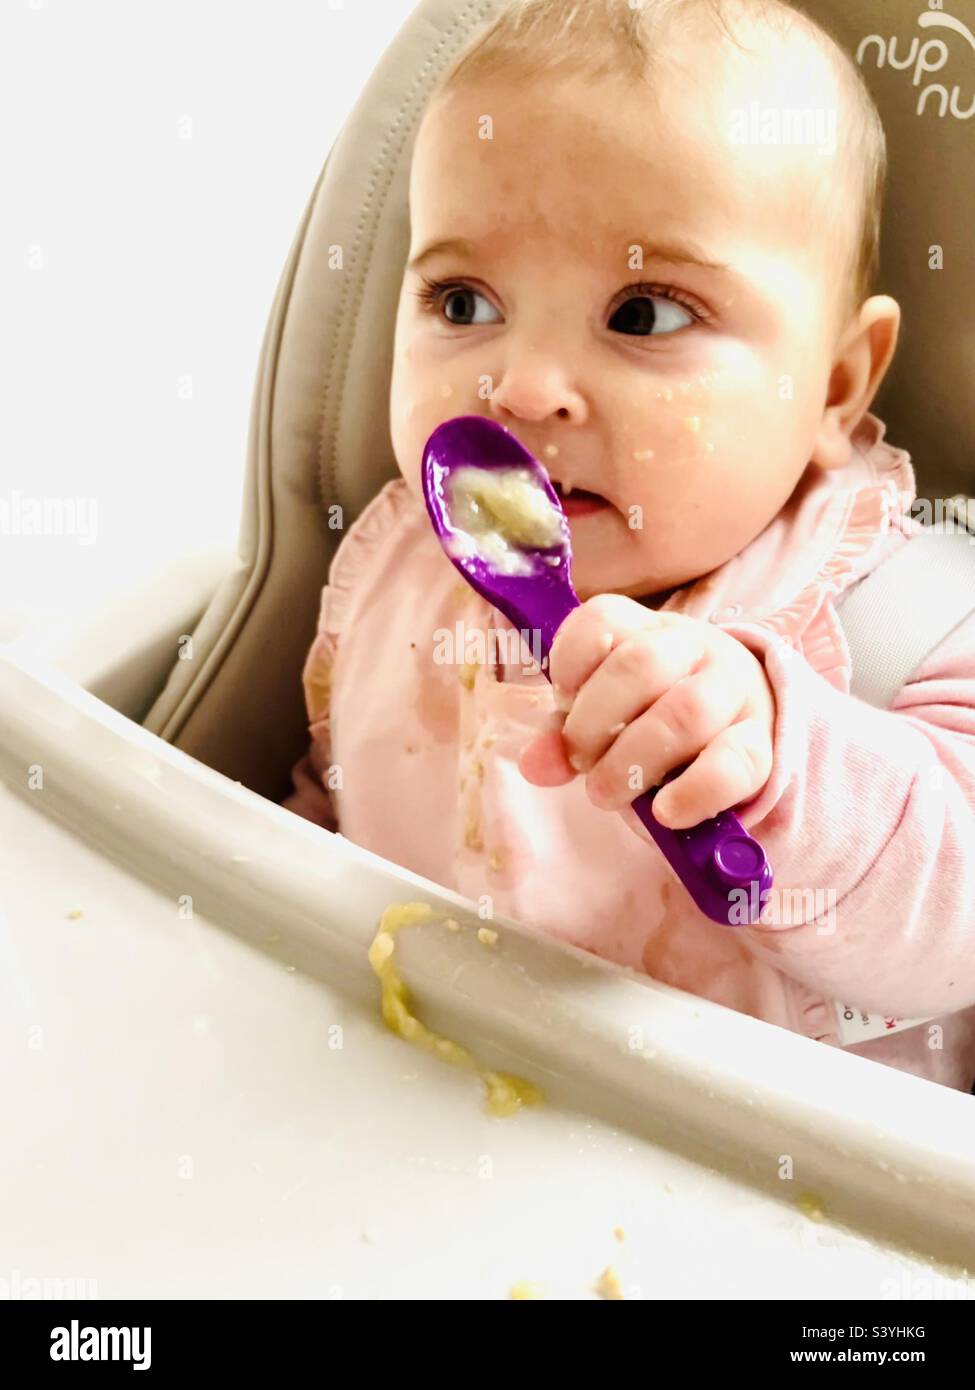 Baby girl weaning, feeding herself with purple spoon Stock Photo